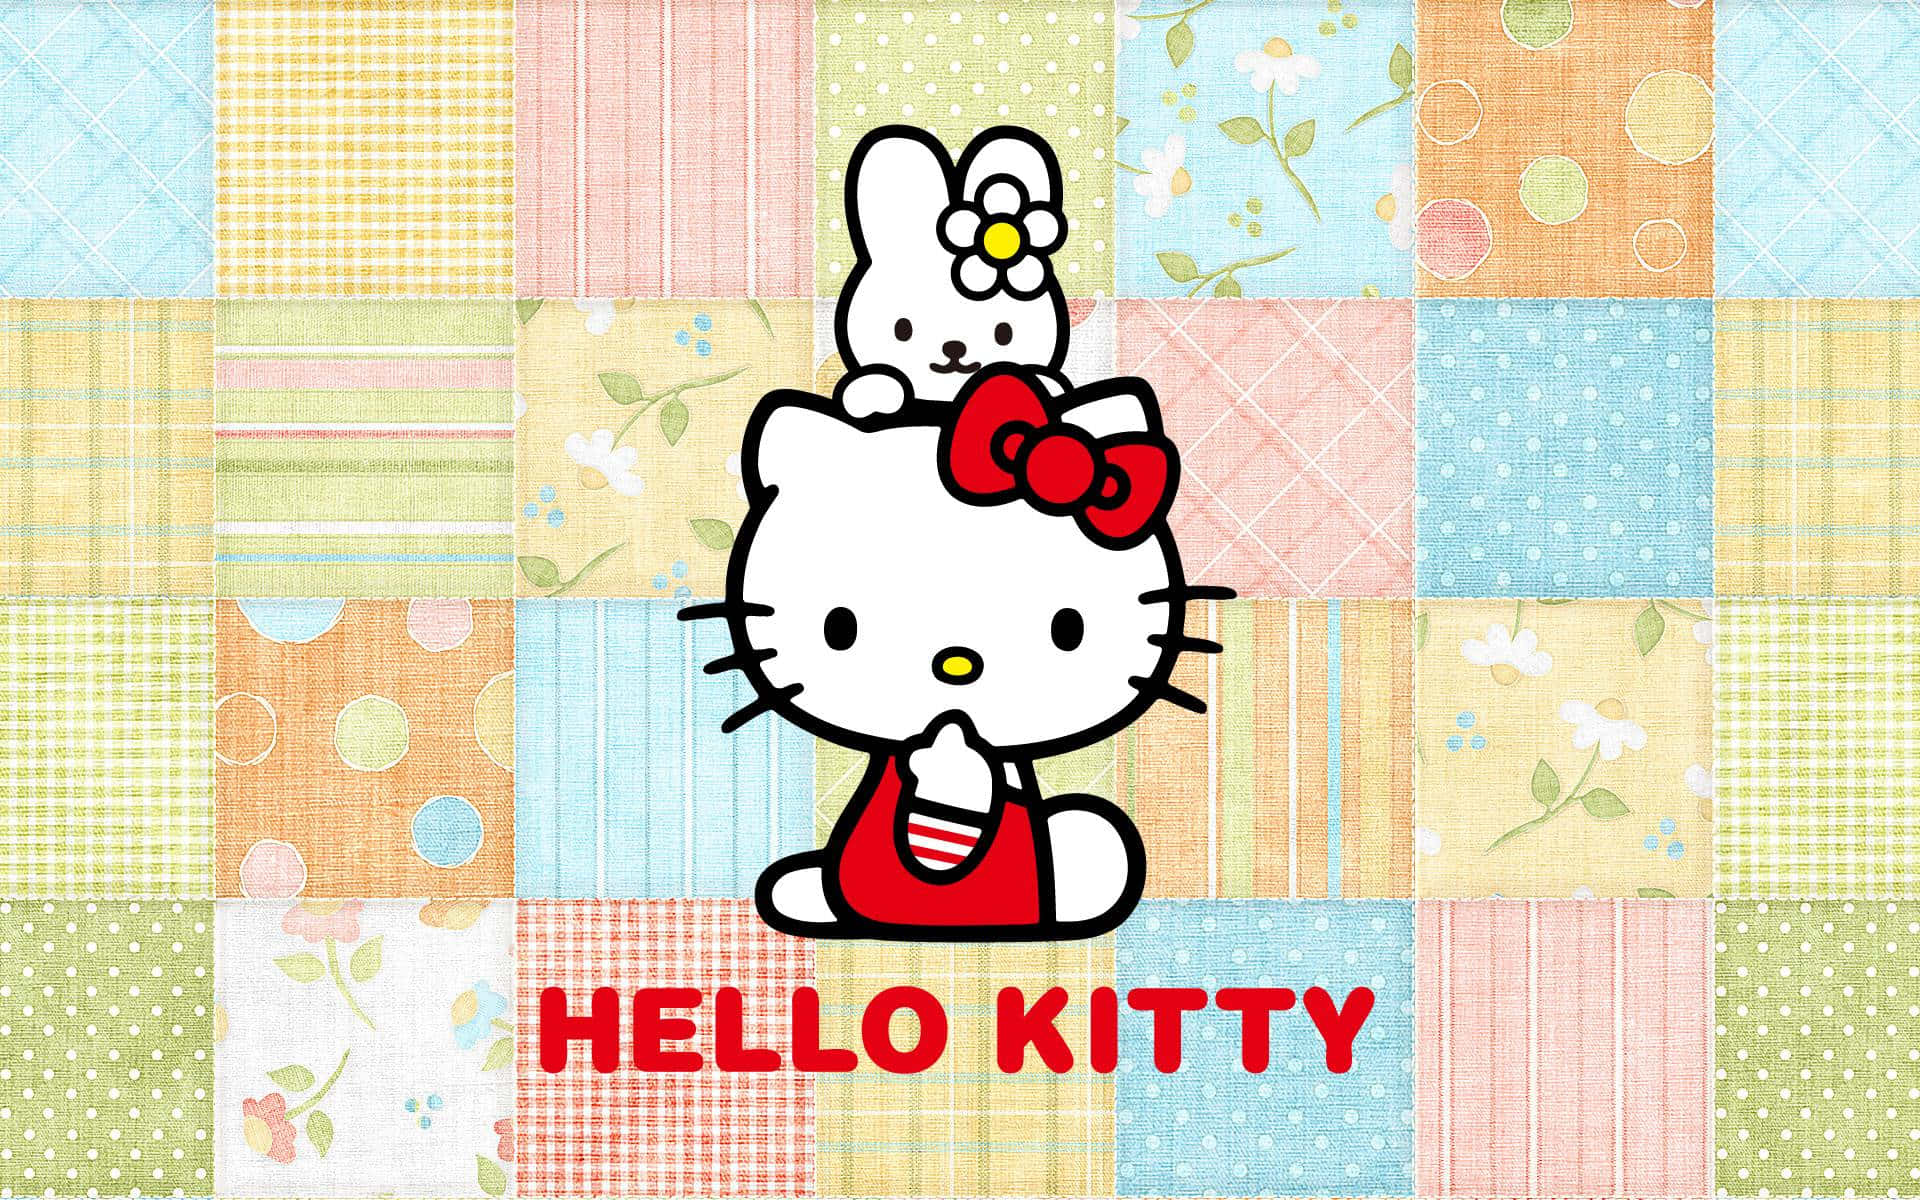 Enjoy the power and beauty of the adorable world of Hello Kitty with a custom PC Wallpaper